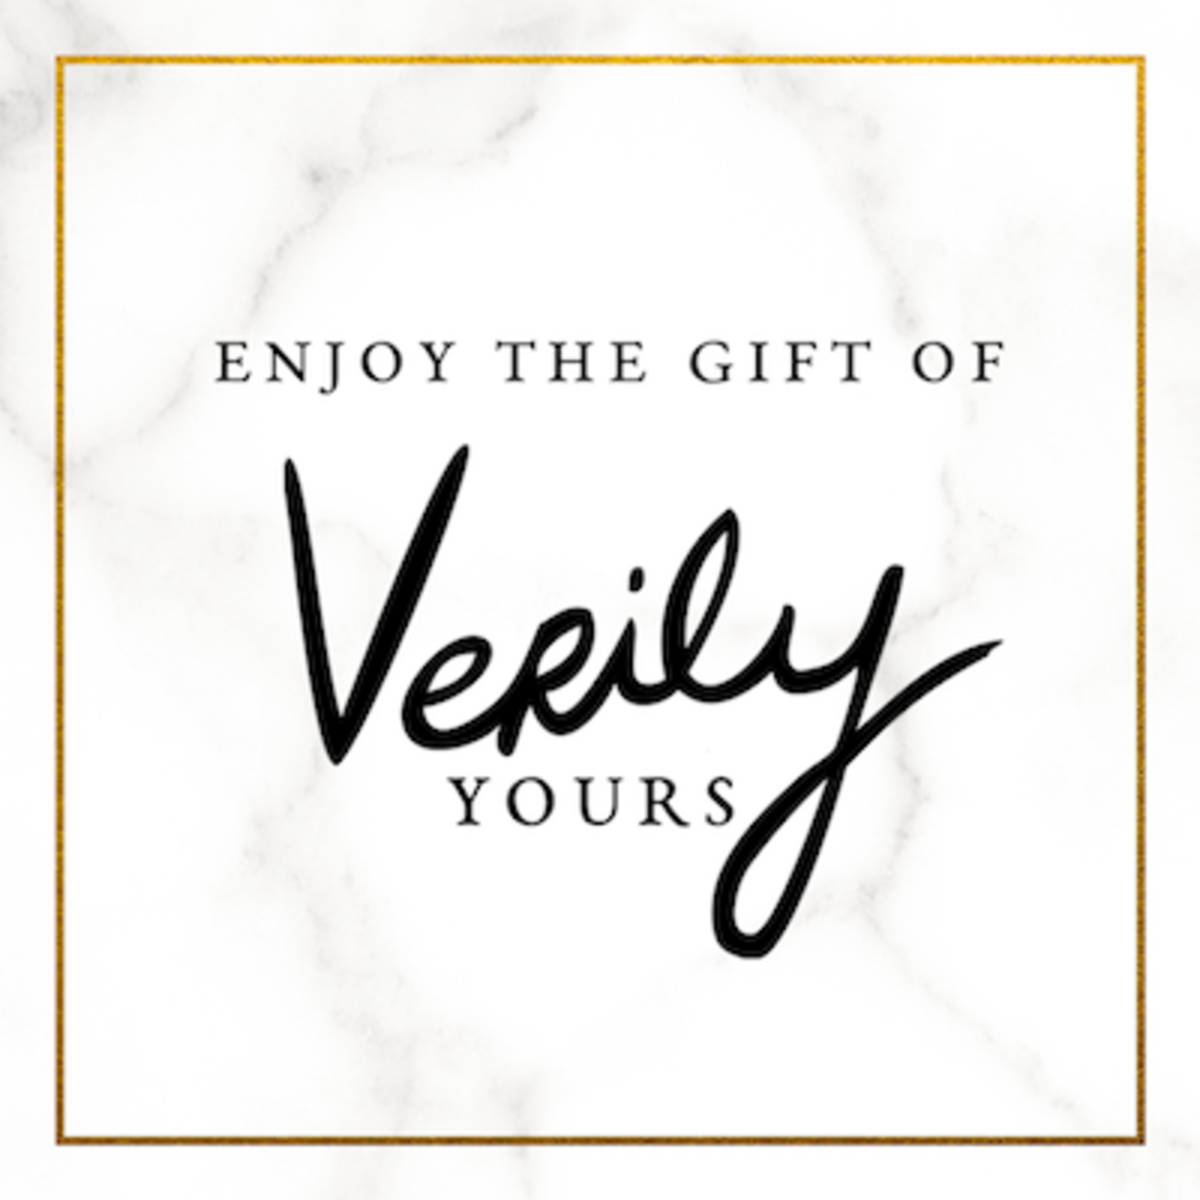 verily_yours_gift_receipt